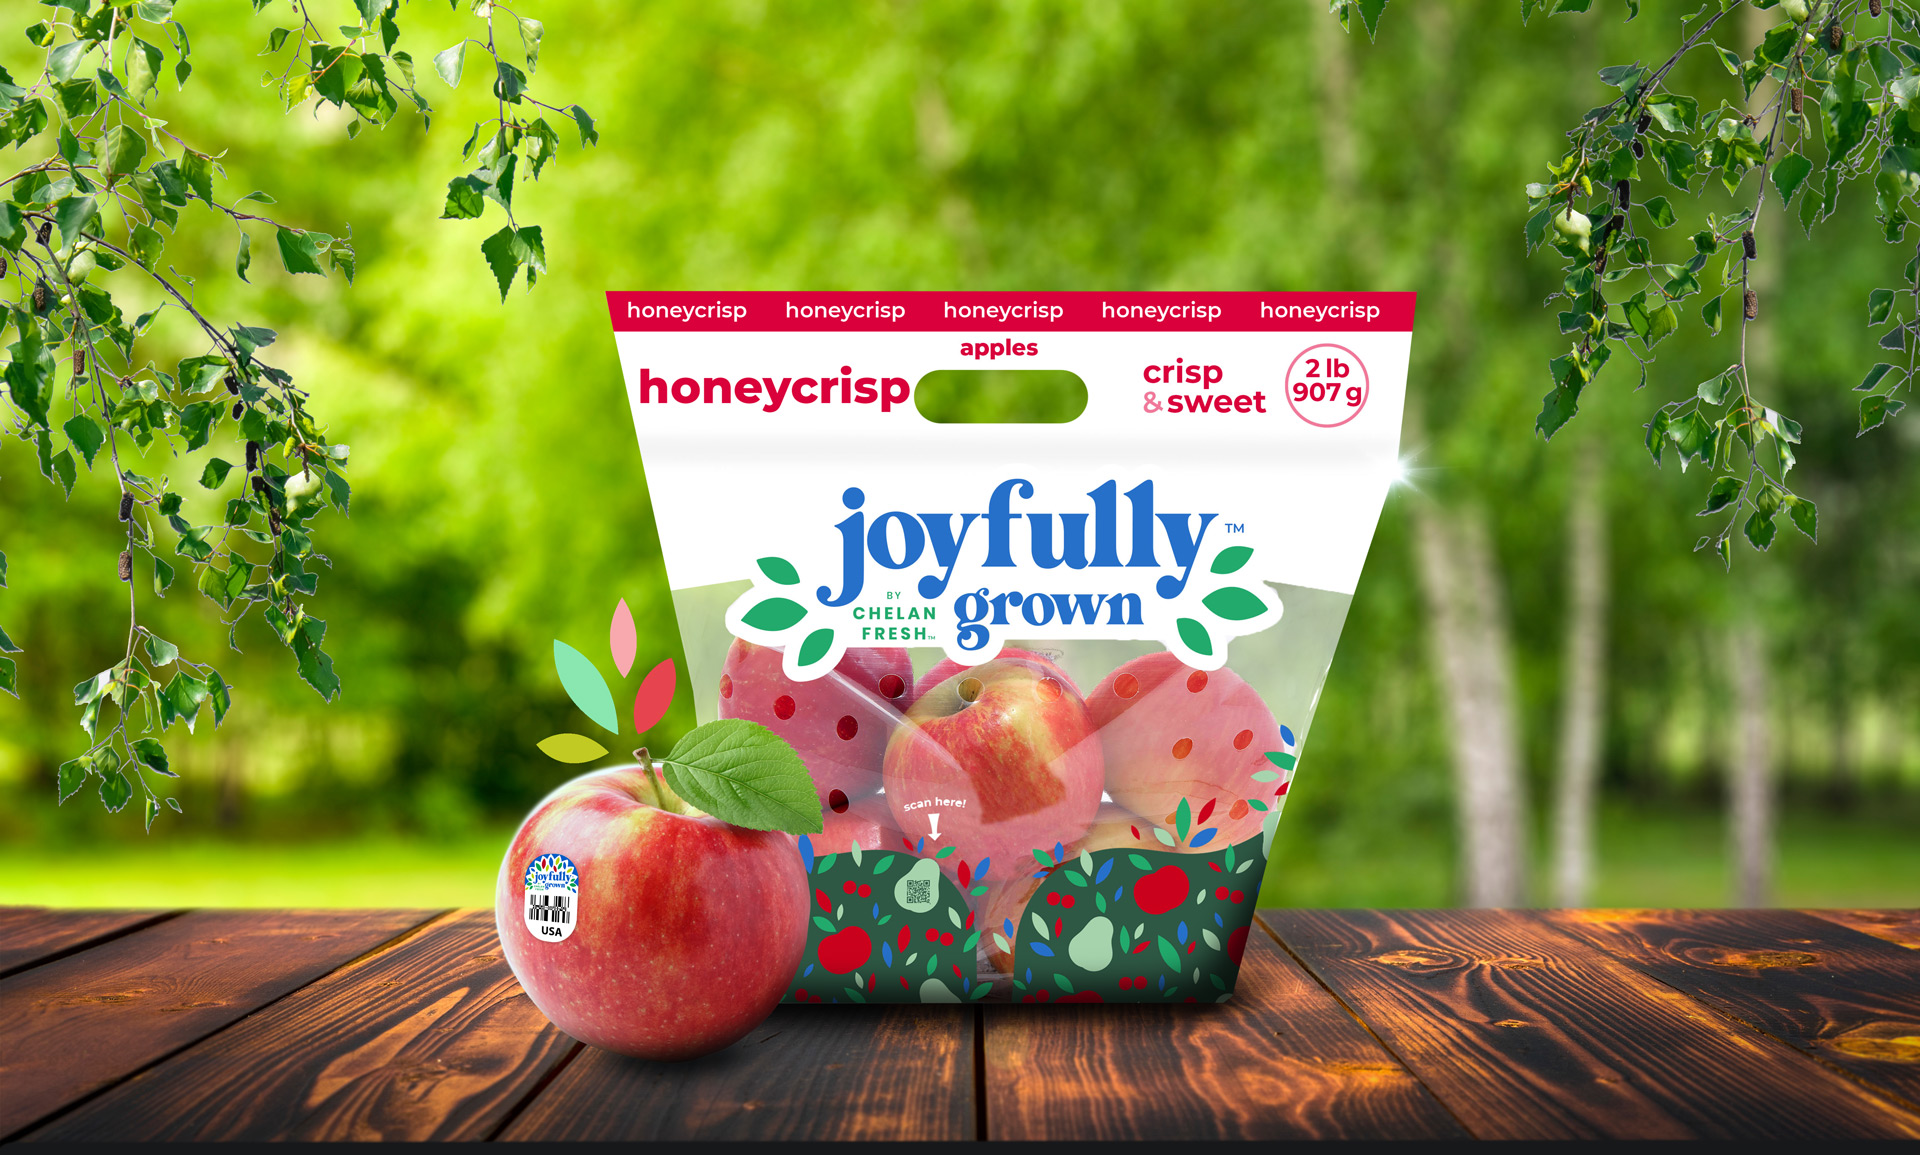 Joyfully Grown Honeycrisp Apple Packaging on Dark Wood Planks and a Blurred out Orchard in the Background